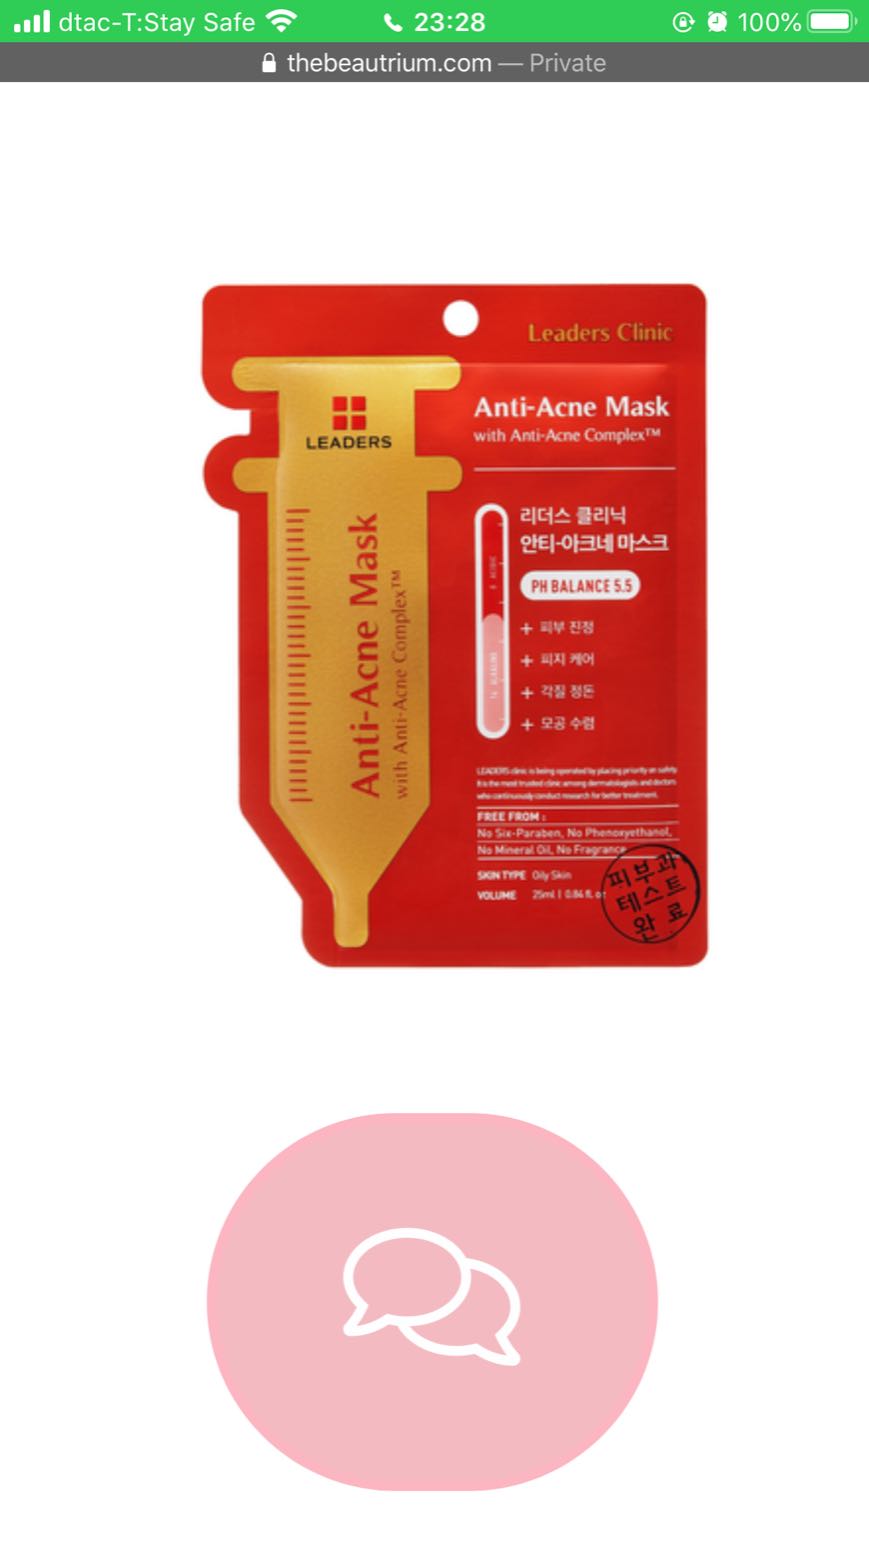 LEADERS Clinic Anti-Acne Mask